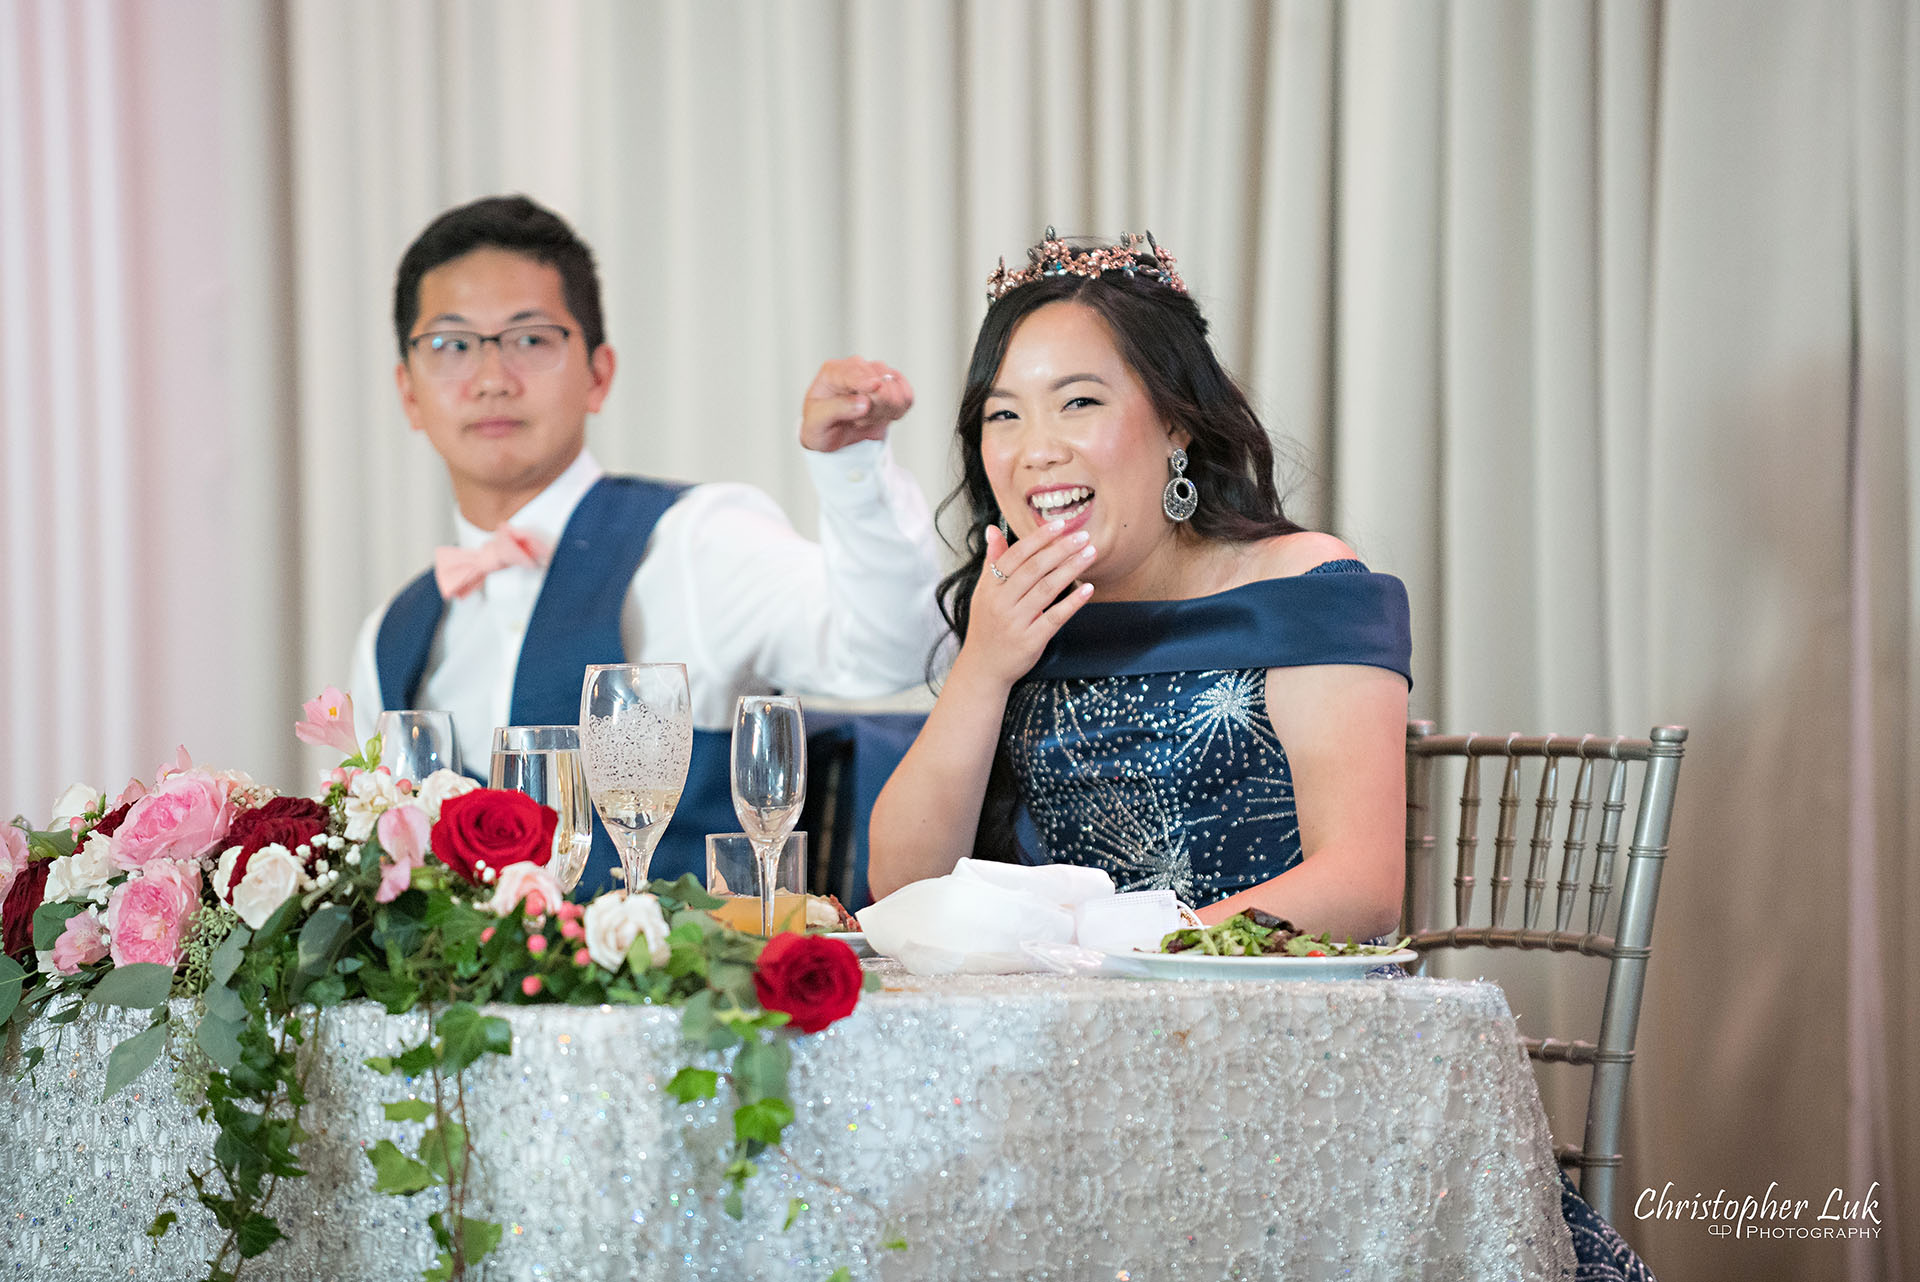 Christopher Luk Toronto Wedding Photographer Bridle Trail Baptist Church Unionville Main Street Crystal Fountain Event Venue Head Table Decor Flower Bell by Masami Crystal Linen Setup Wide Stage Curtains Bride Groom Speeches Laugh Reaction Pointing Funny